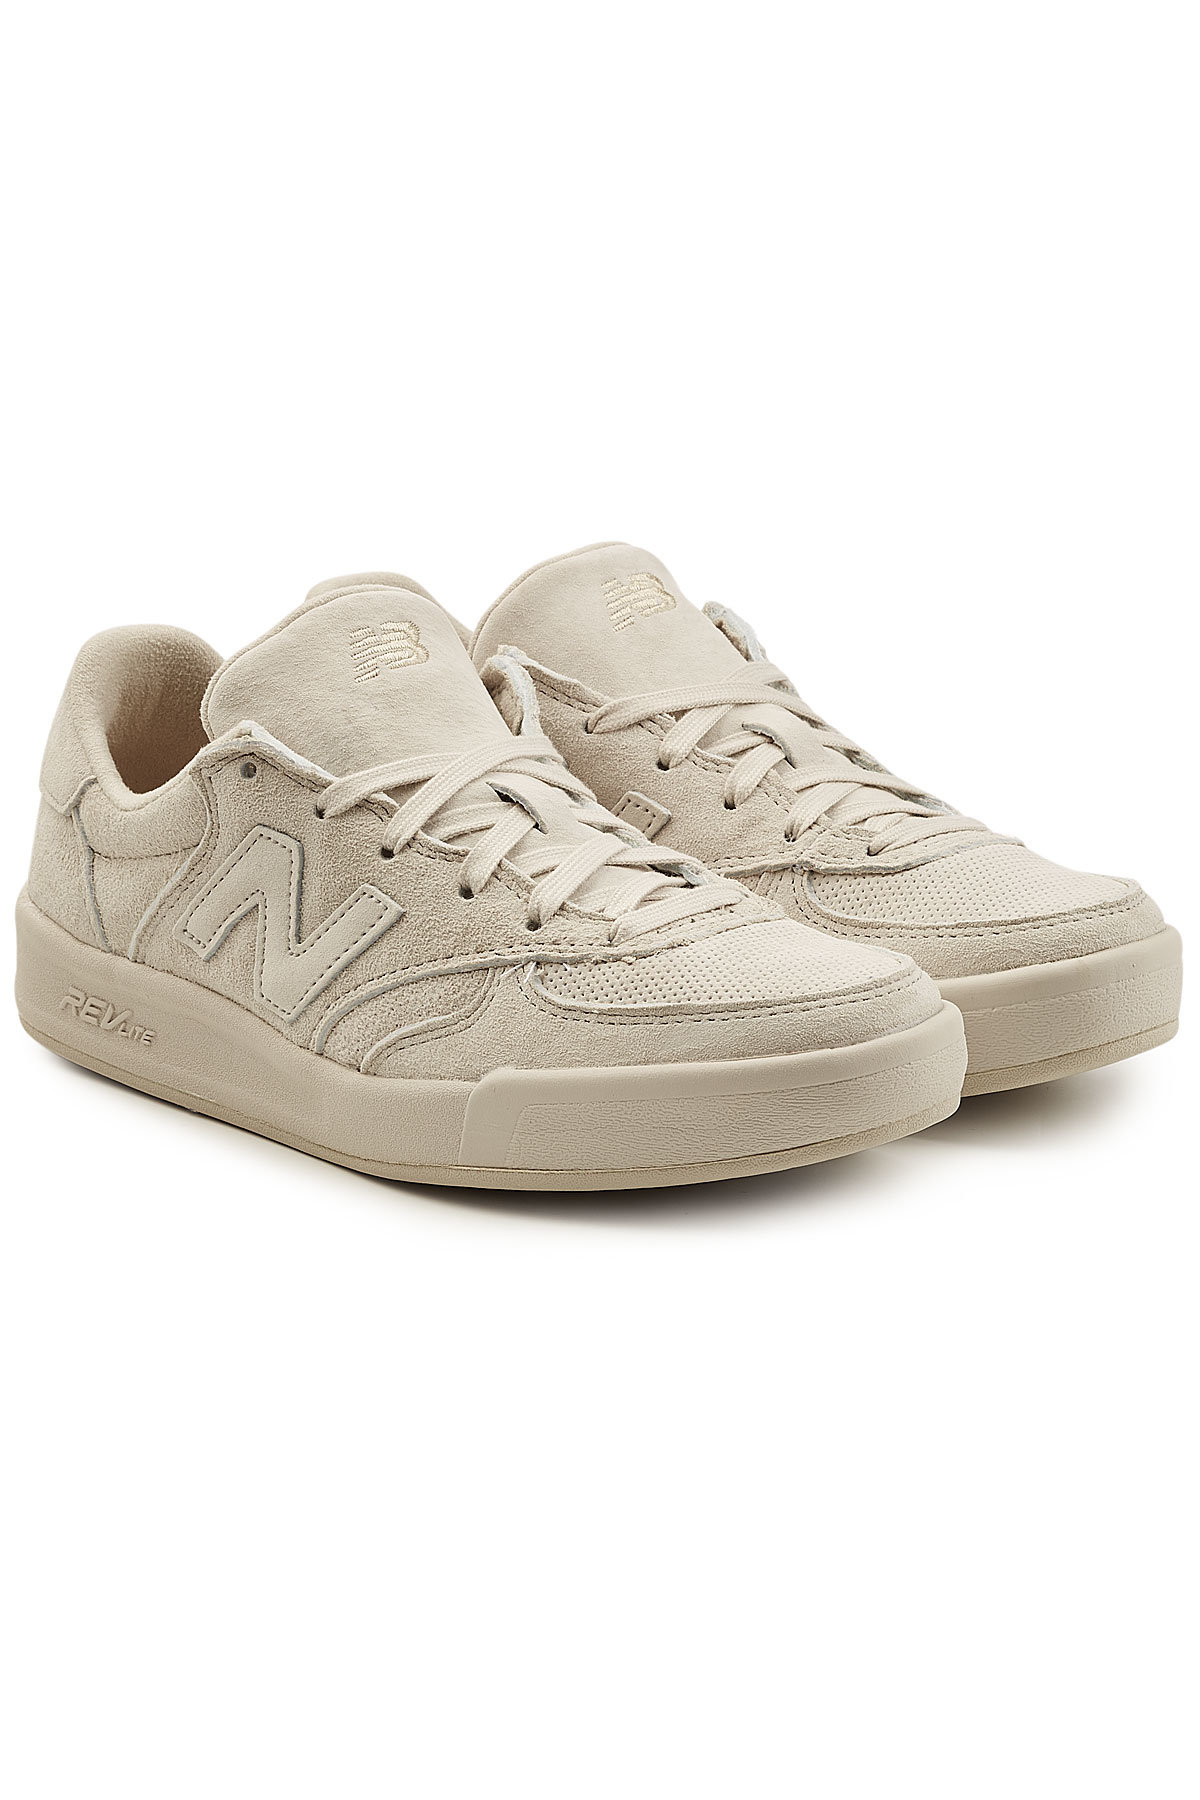 WRT300 Suede Sneakers by New Balance